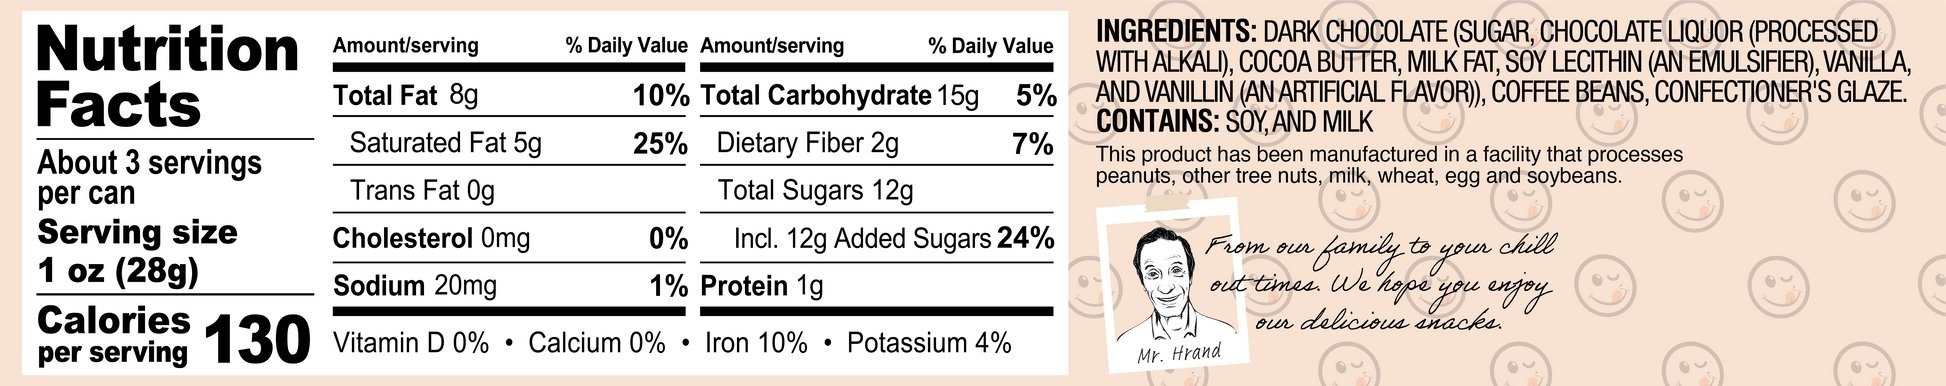 Chocolate Covered Espresso Nutrition Facts